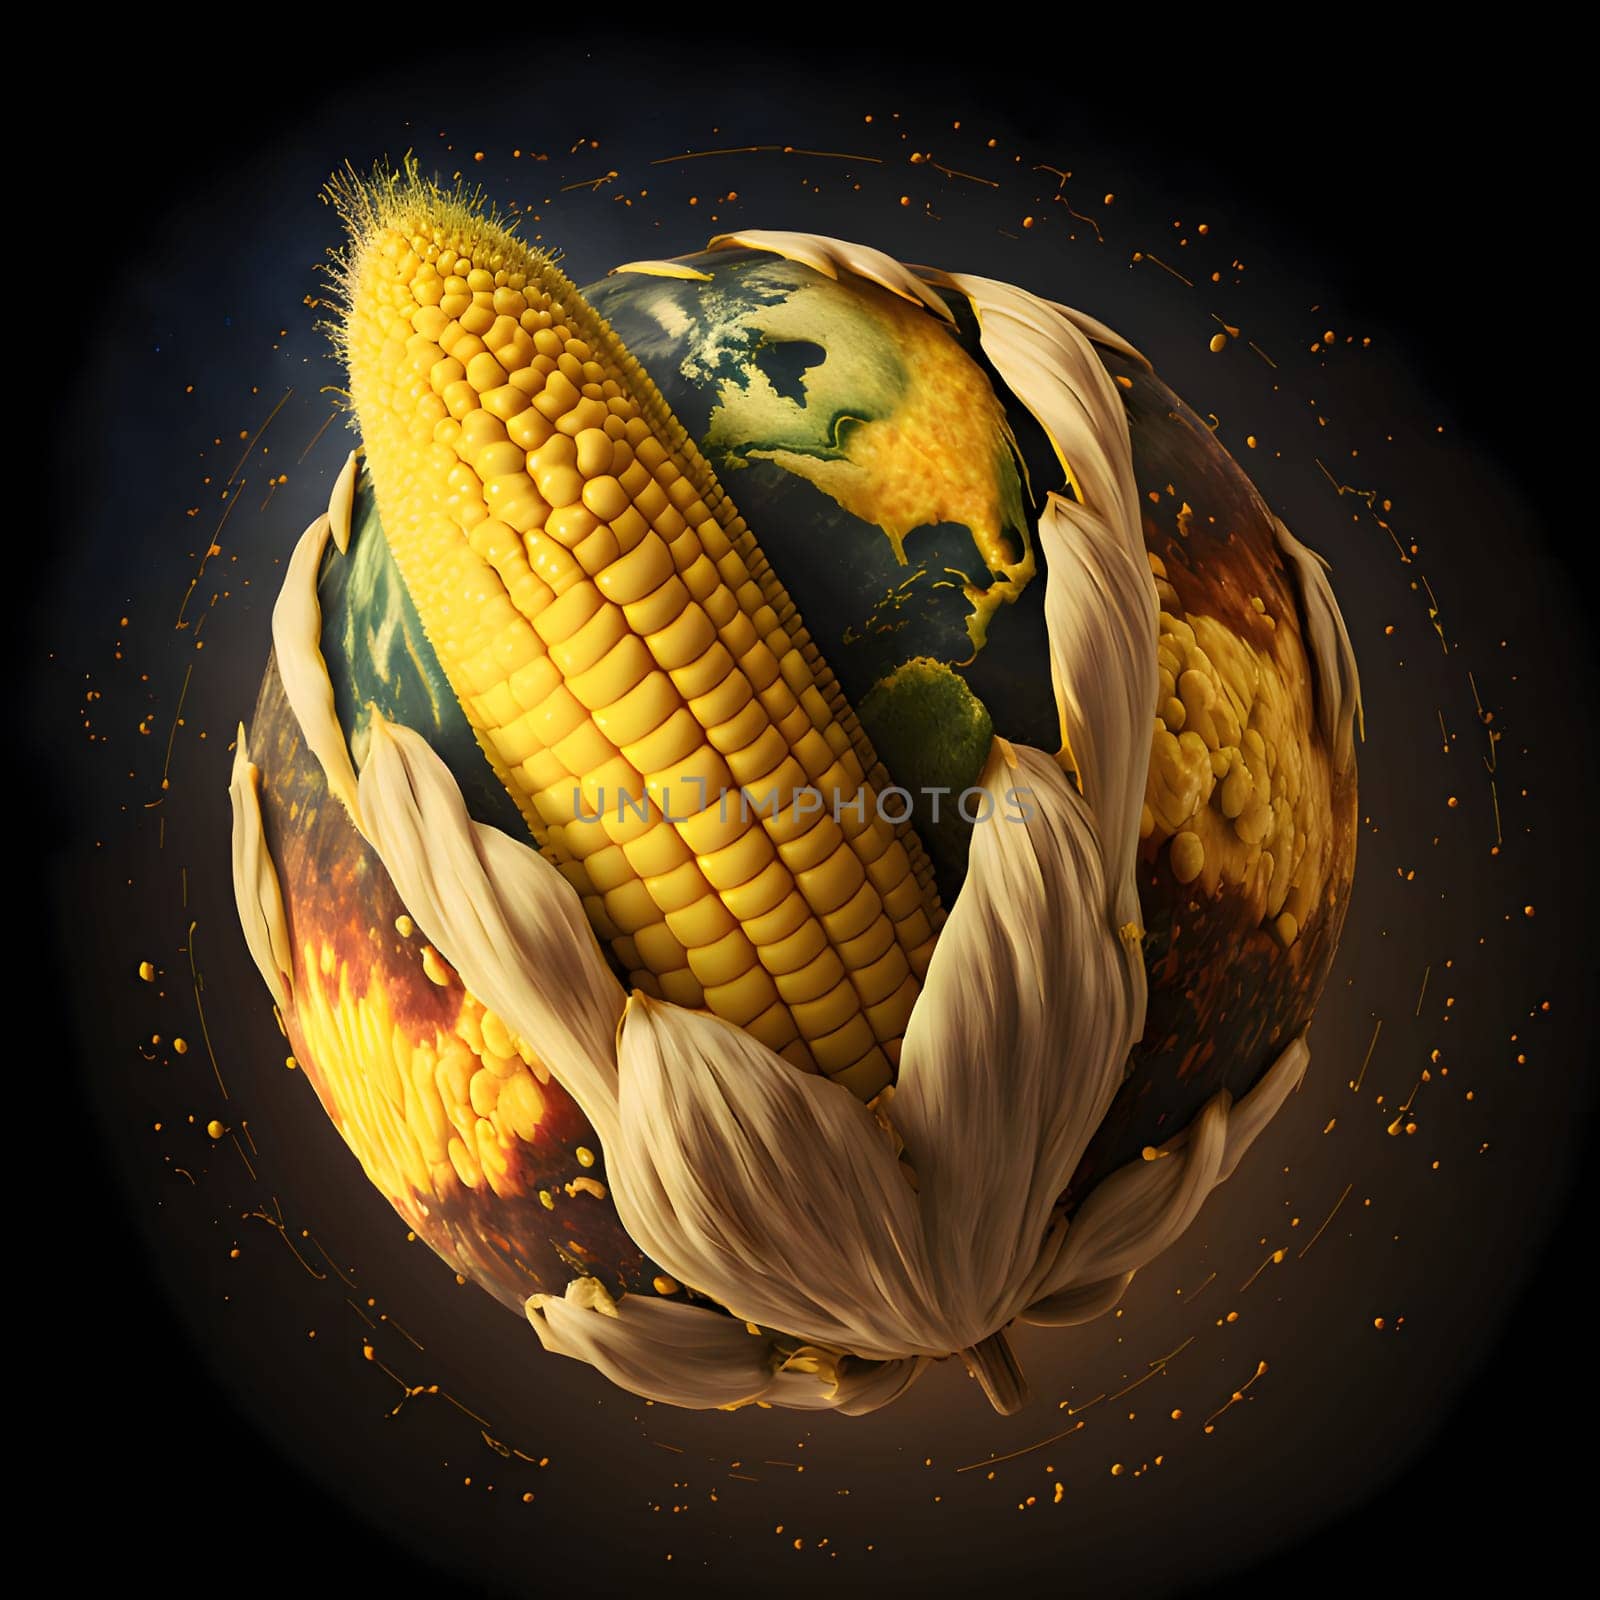 Cob of corn surrounding the earth planets on a black background. Corn as a dish of thanksgiving for the harvest. An atmosphere of joy and celebration.